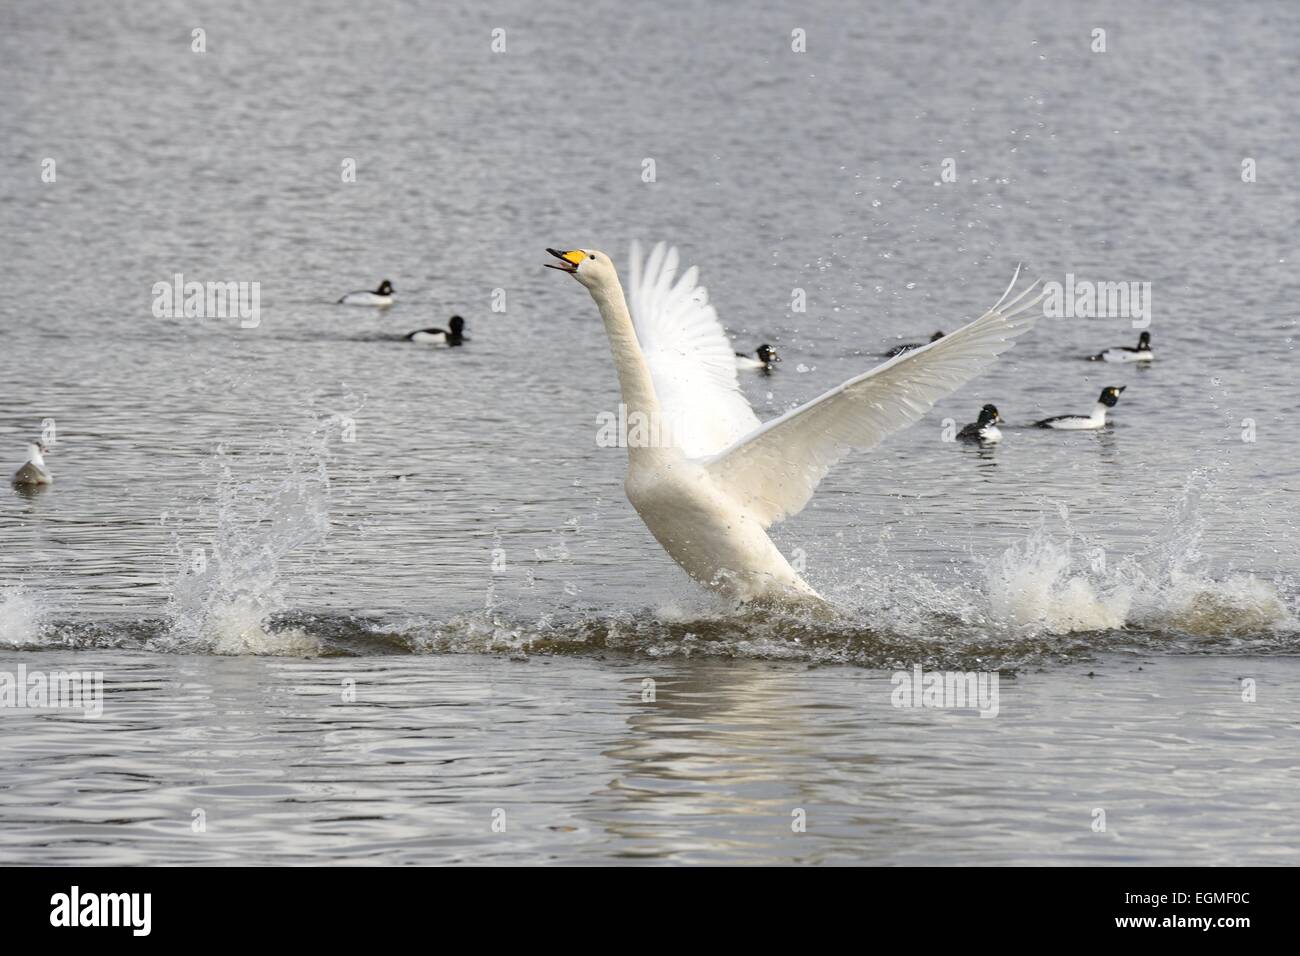 A whooper swan struggles to break free of the water and get airborne. Stock Photo